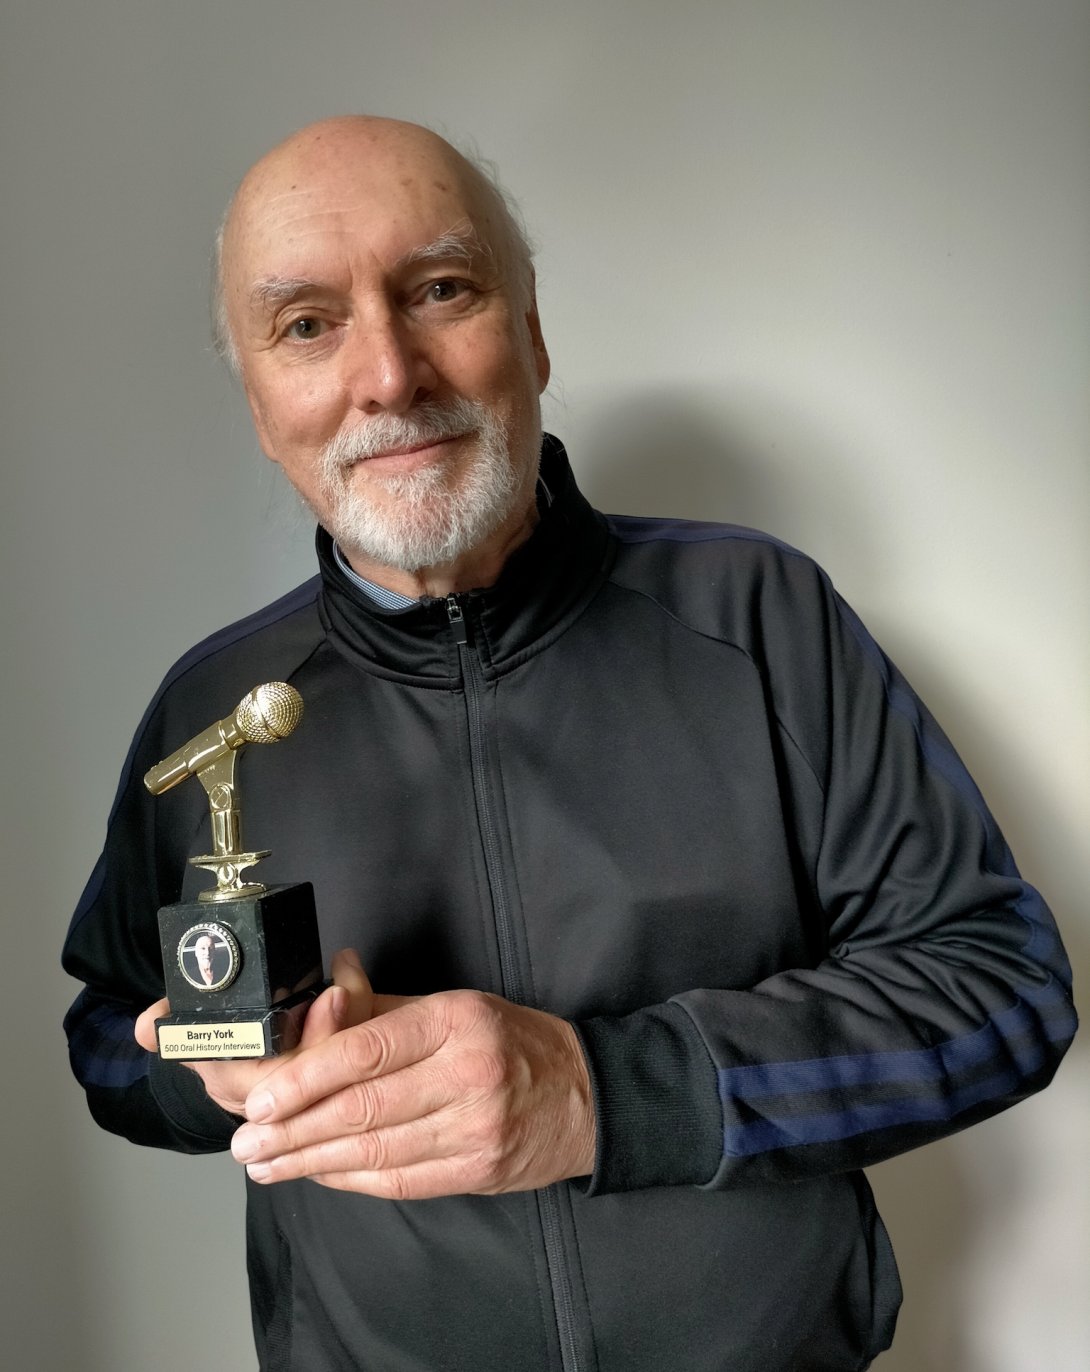 Middle-aged man with a white beard smiling and holding up a trophy with a golden microphone that reads 'Barry York 500 Oral History Interviews'